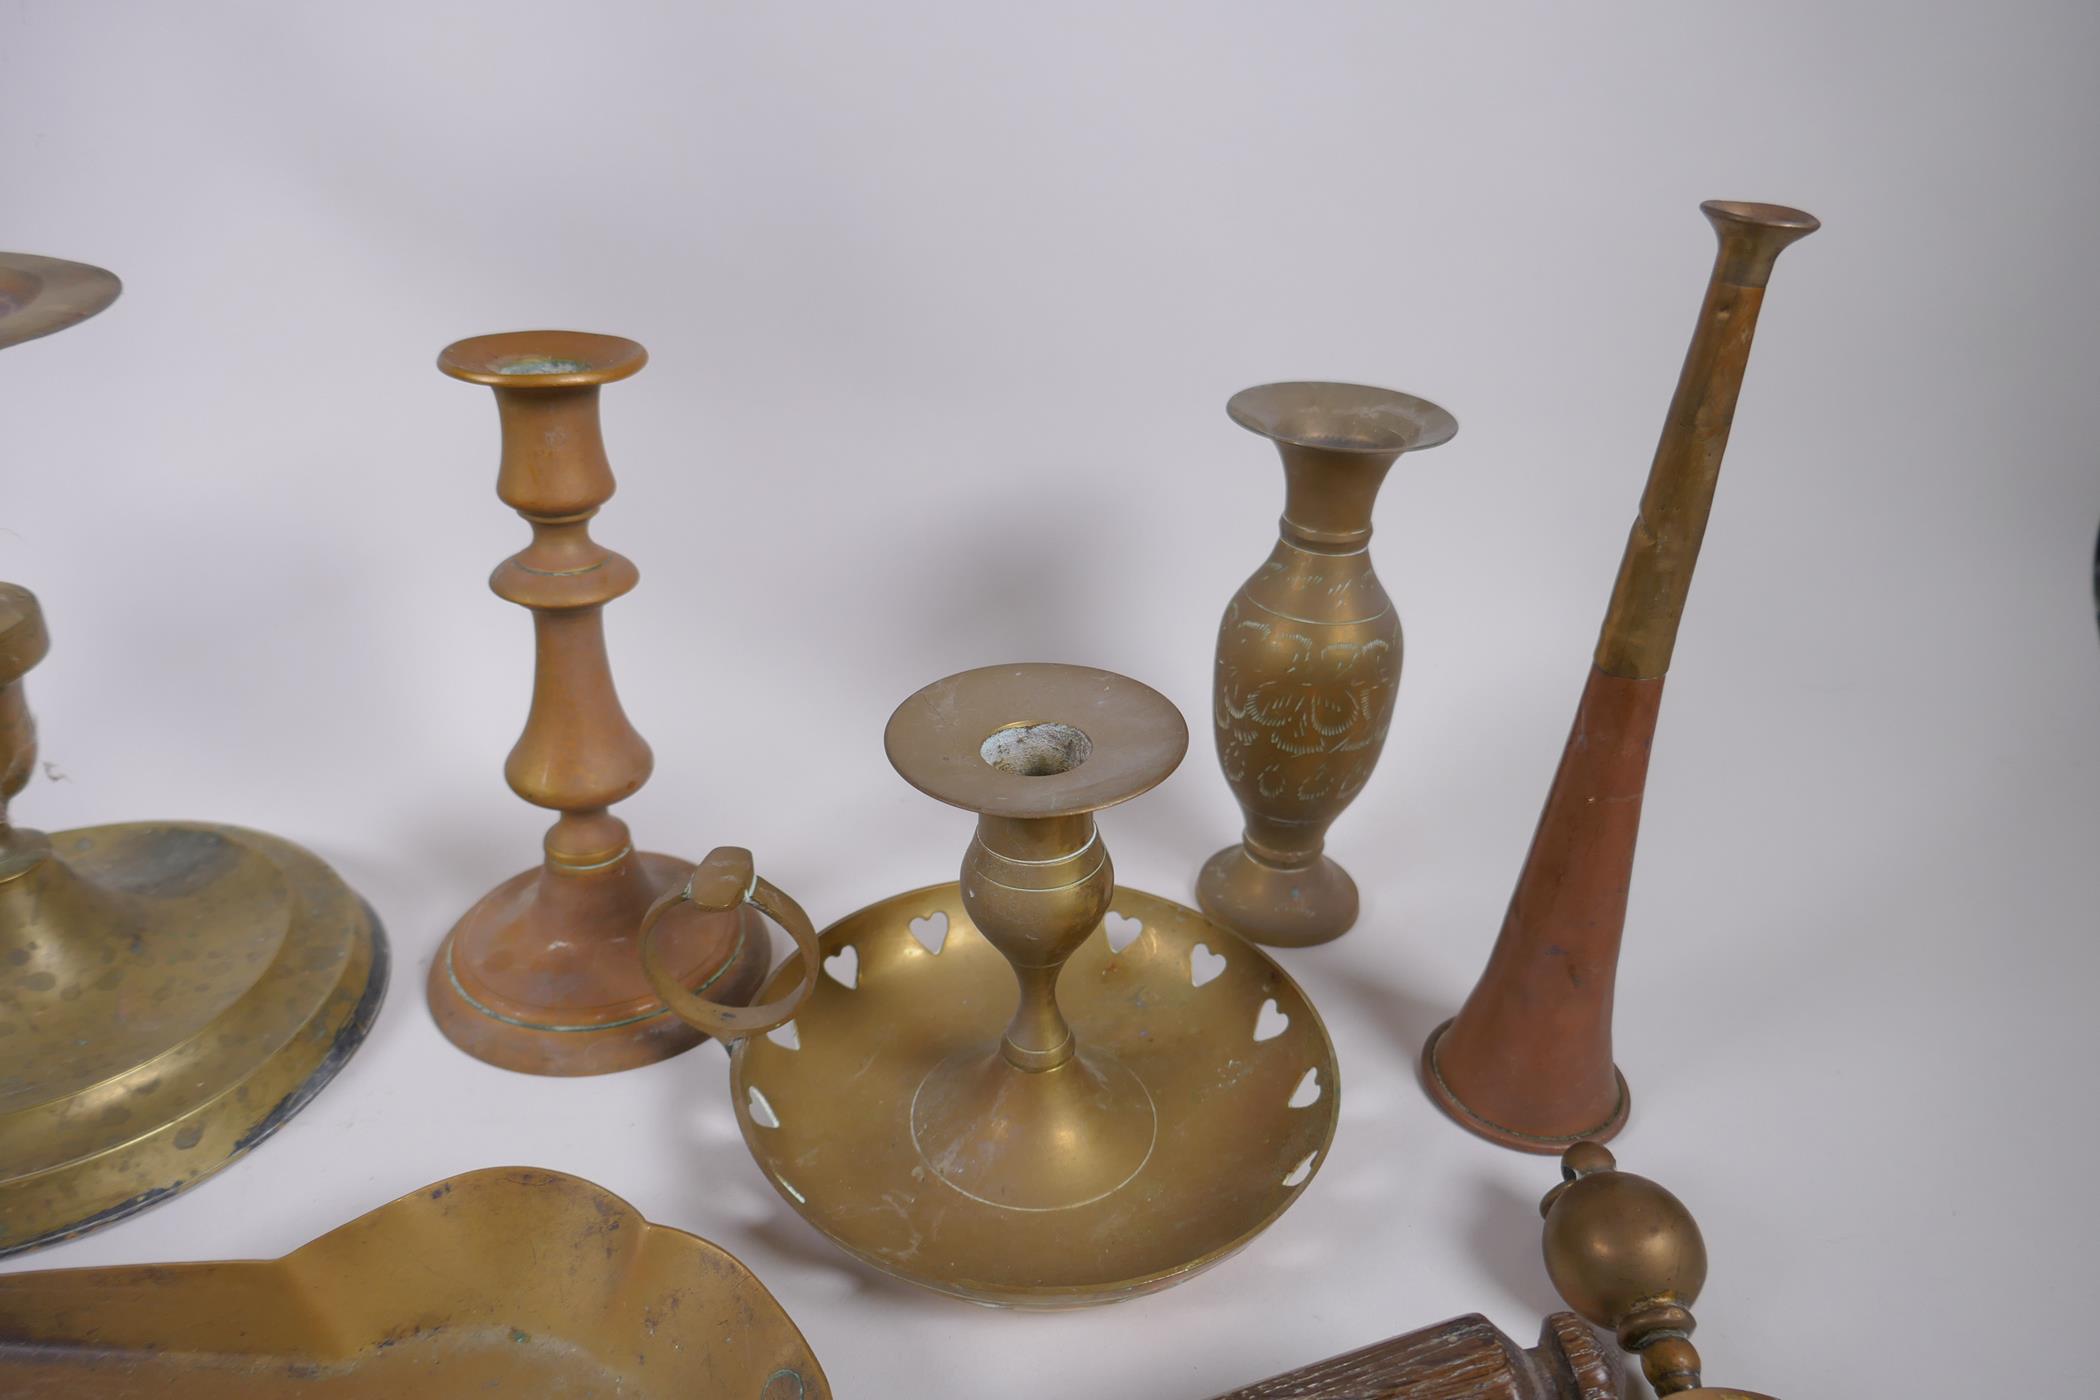 A quantity of brassware including a four spout whale oil lamp, pairs of candlesticks, ash trays, - Image 3 of 7